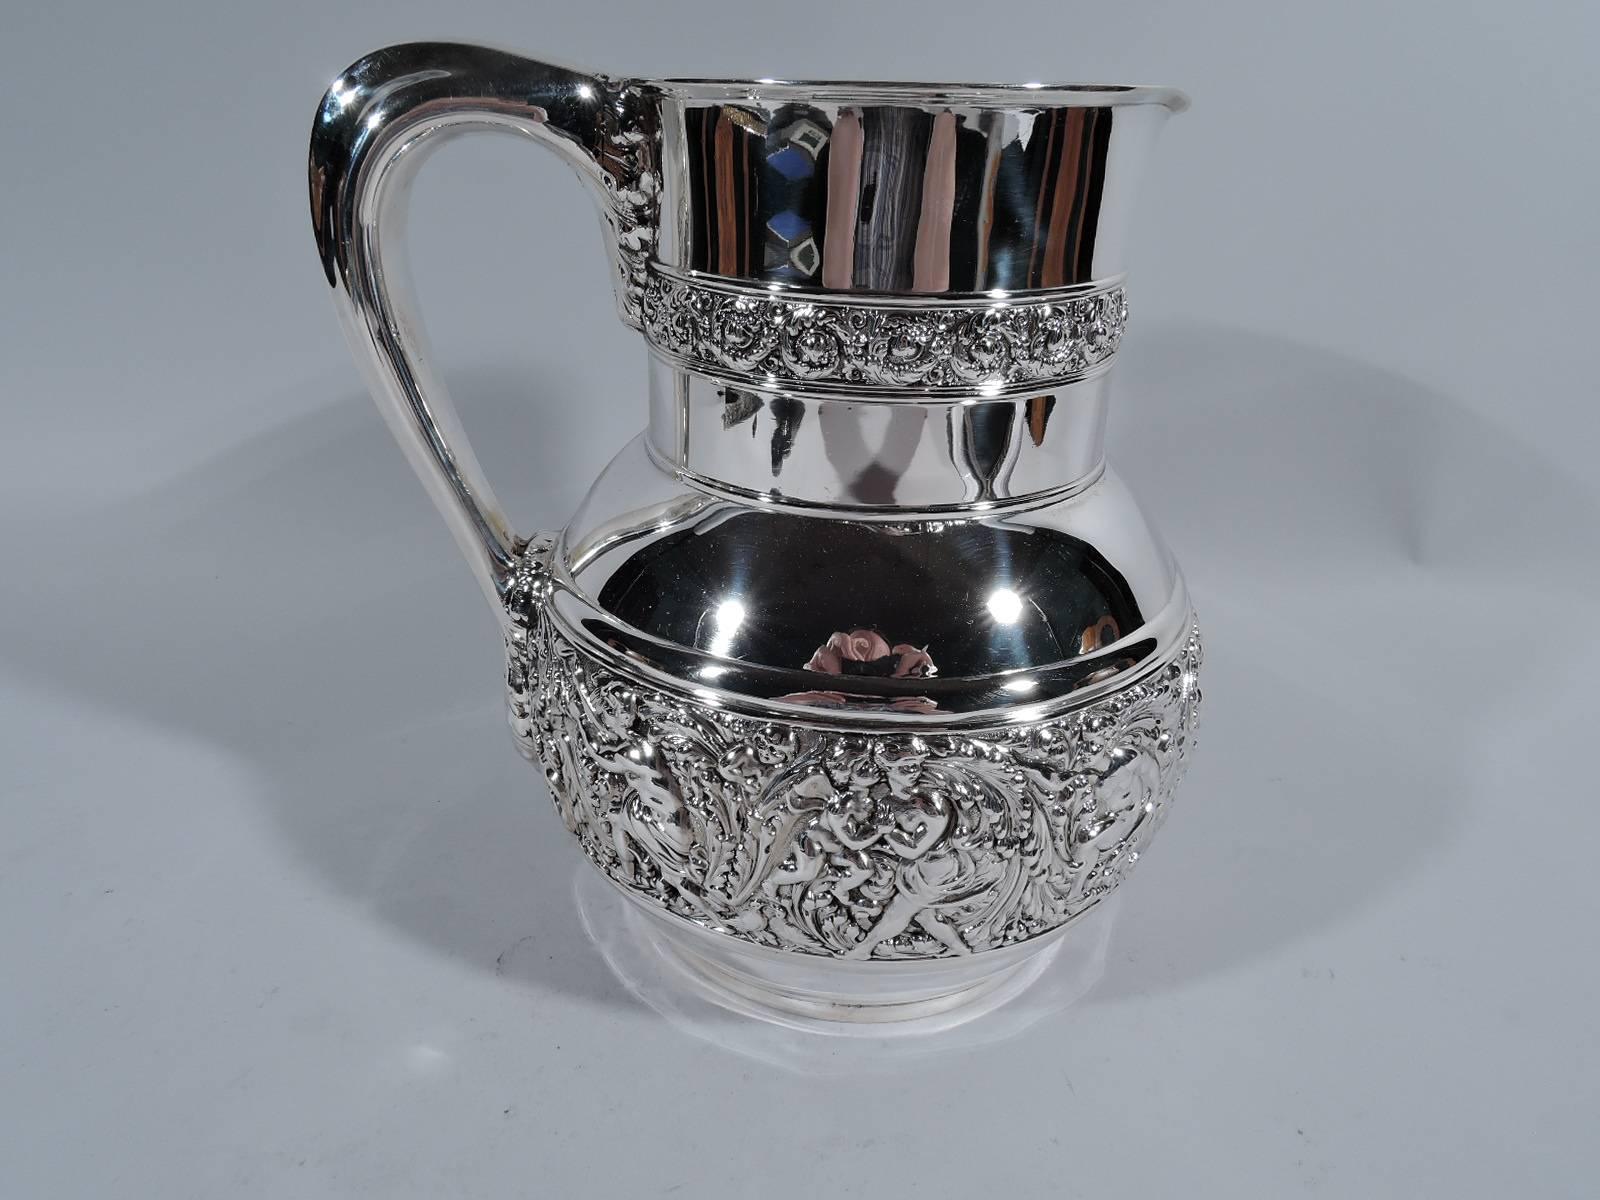 Sterling silver water pitcher in Olympian pattern. Made by Tiffany & Co. in New York. Globular with drum-form neck, small lip spout, and leaf-mounted handle. Rinceaux frieze inhabited by harp-strumming, love-making, and peekaboo-playing figures.